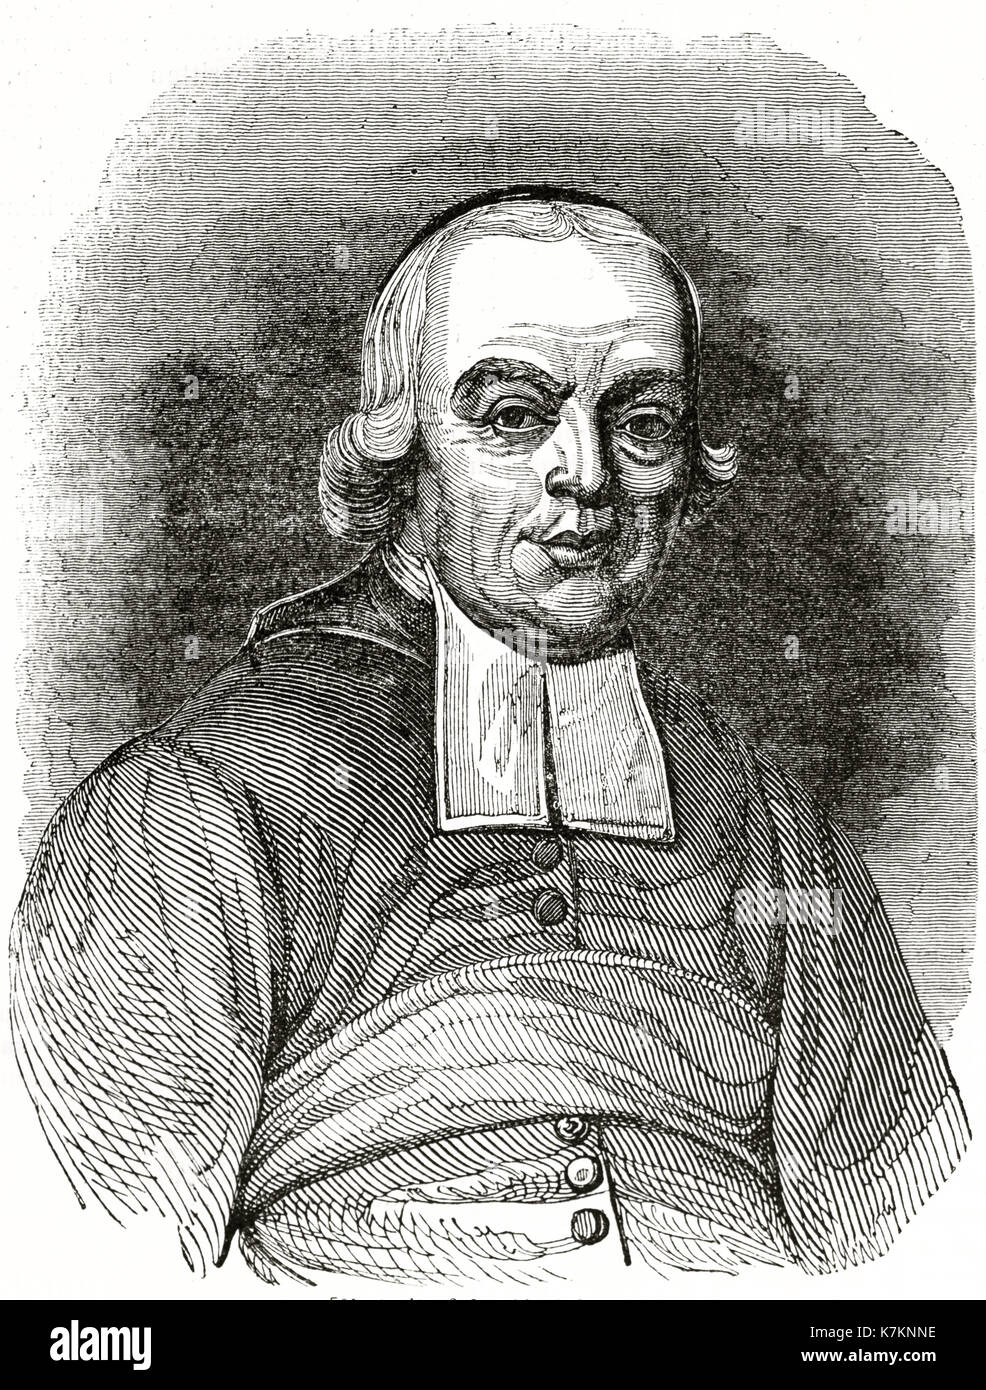 Old engraved portrait of Abbe Charles-Michel de l'Epee (1712 – 1789), French philantropic educator. Published on The Penny Magazine, London, 1837 Stock Photo